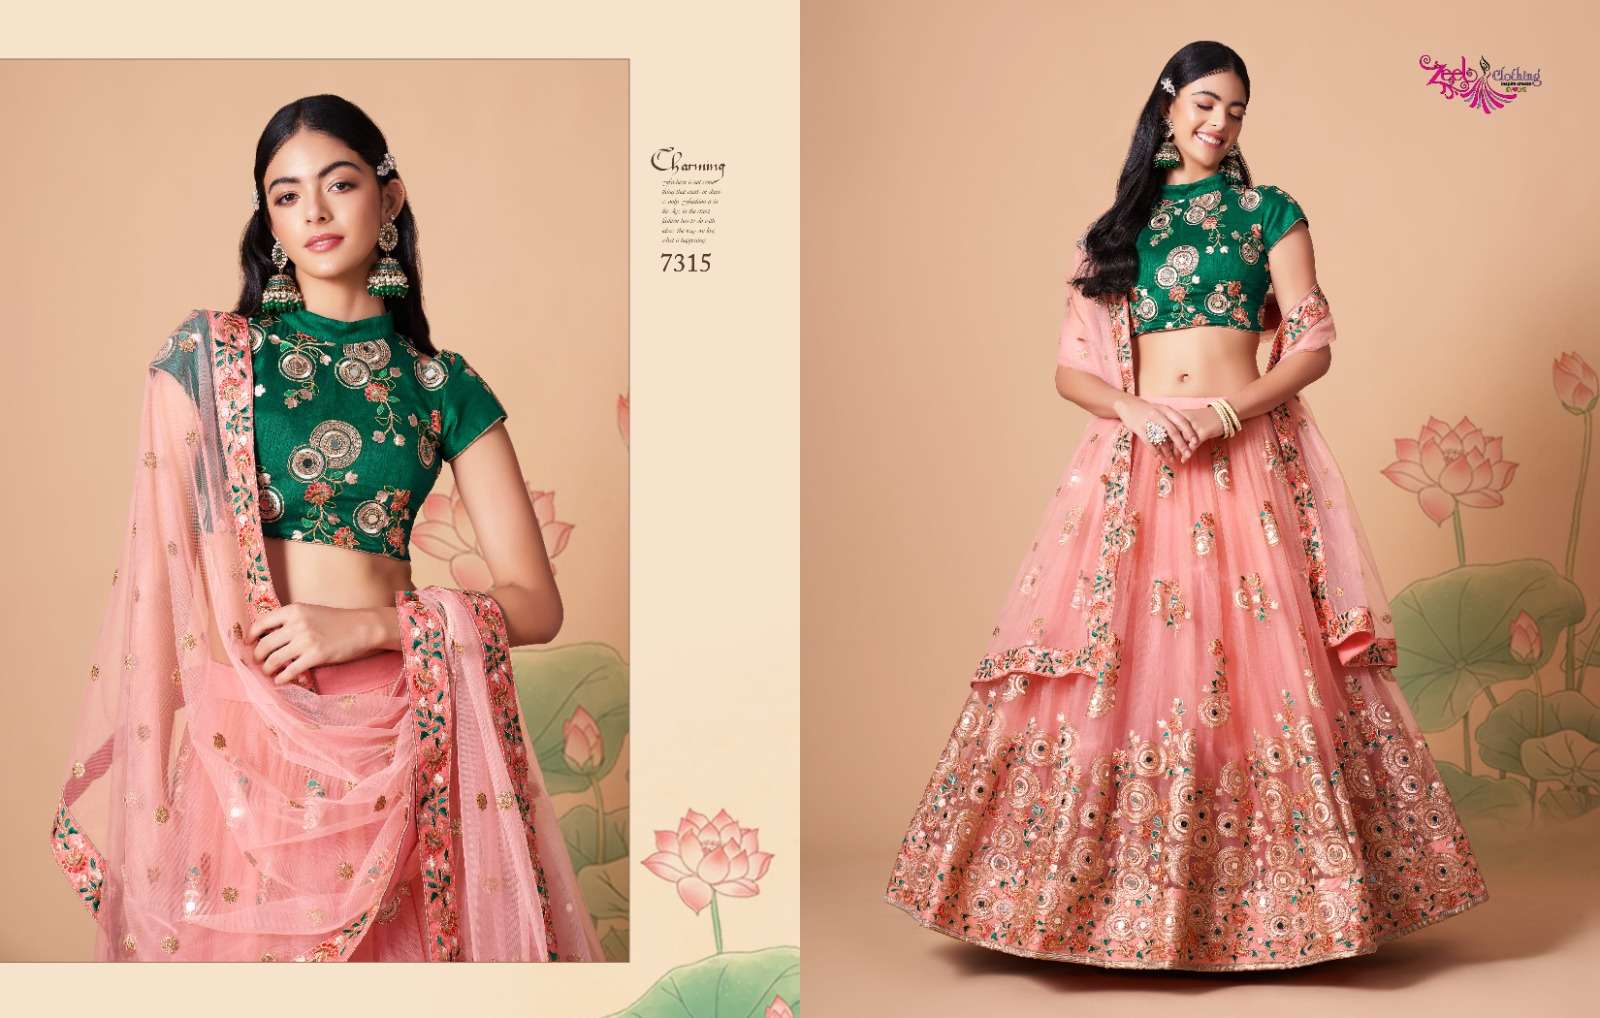 Neo Romantic Vol-3 By Zeel Clothing 7315 To 7326 Series Bridal Wear Collection Beautiful Stylish Colorful Fancy Party Wear & Occasional Wear Soft Net Lehengas At Wholesale Price